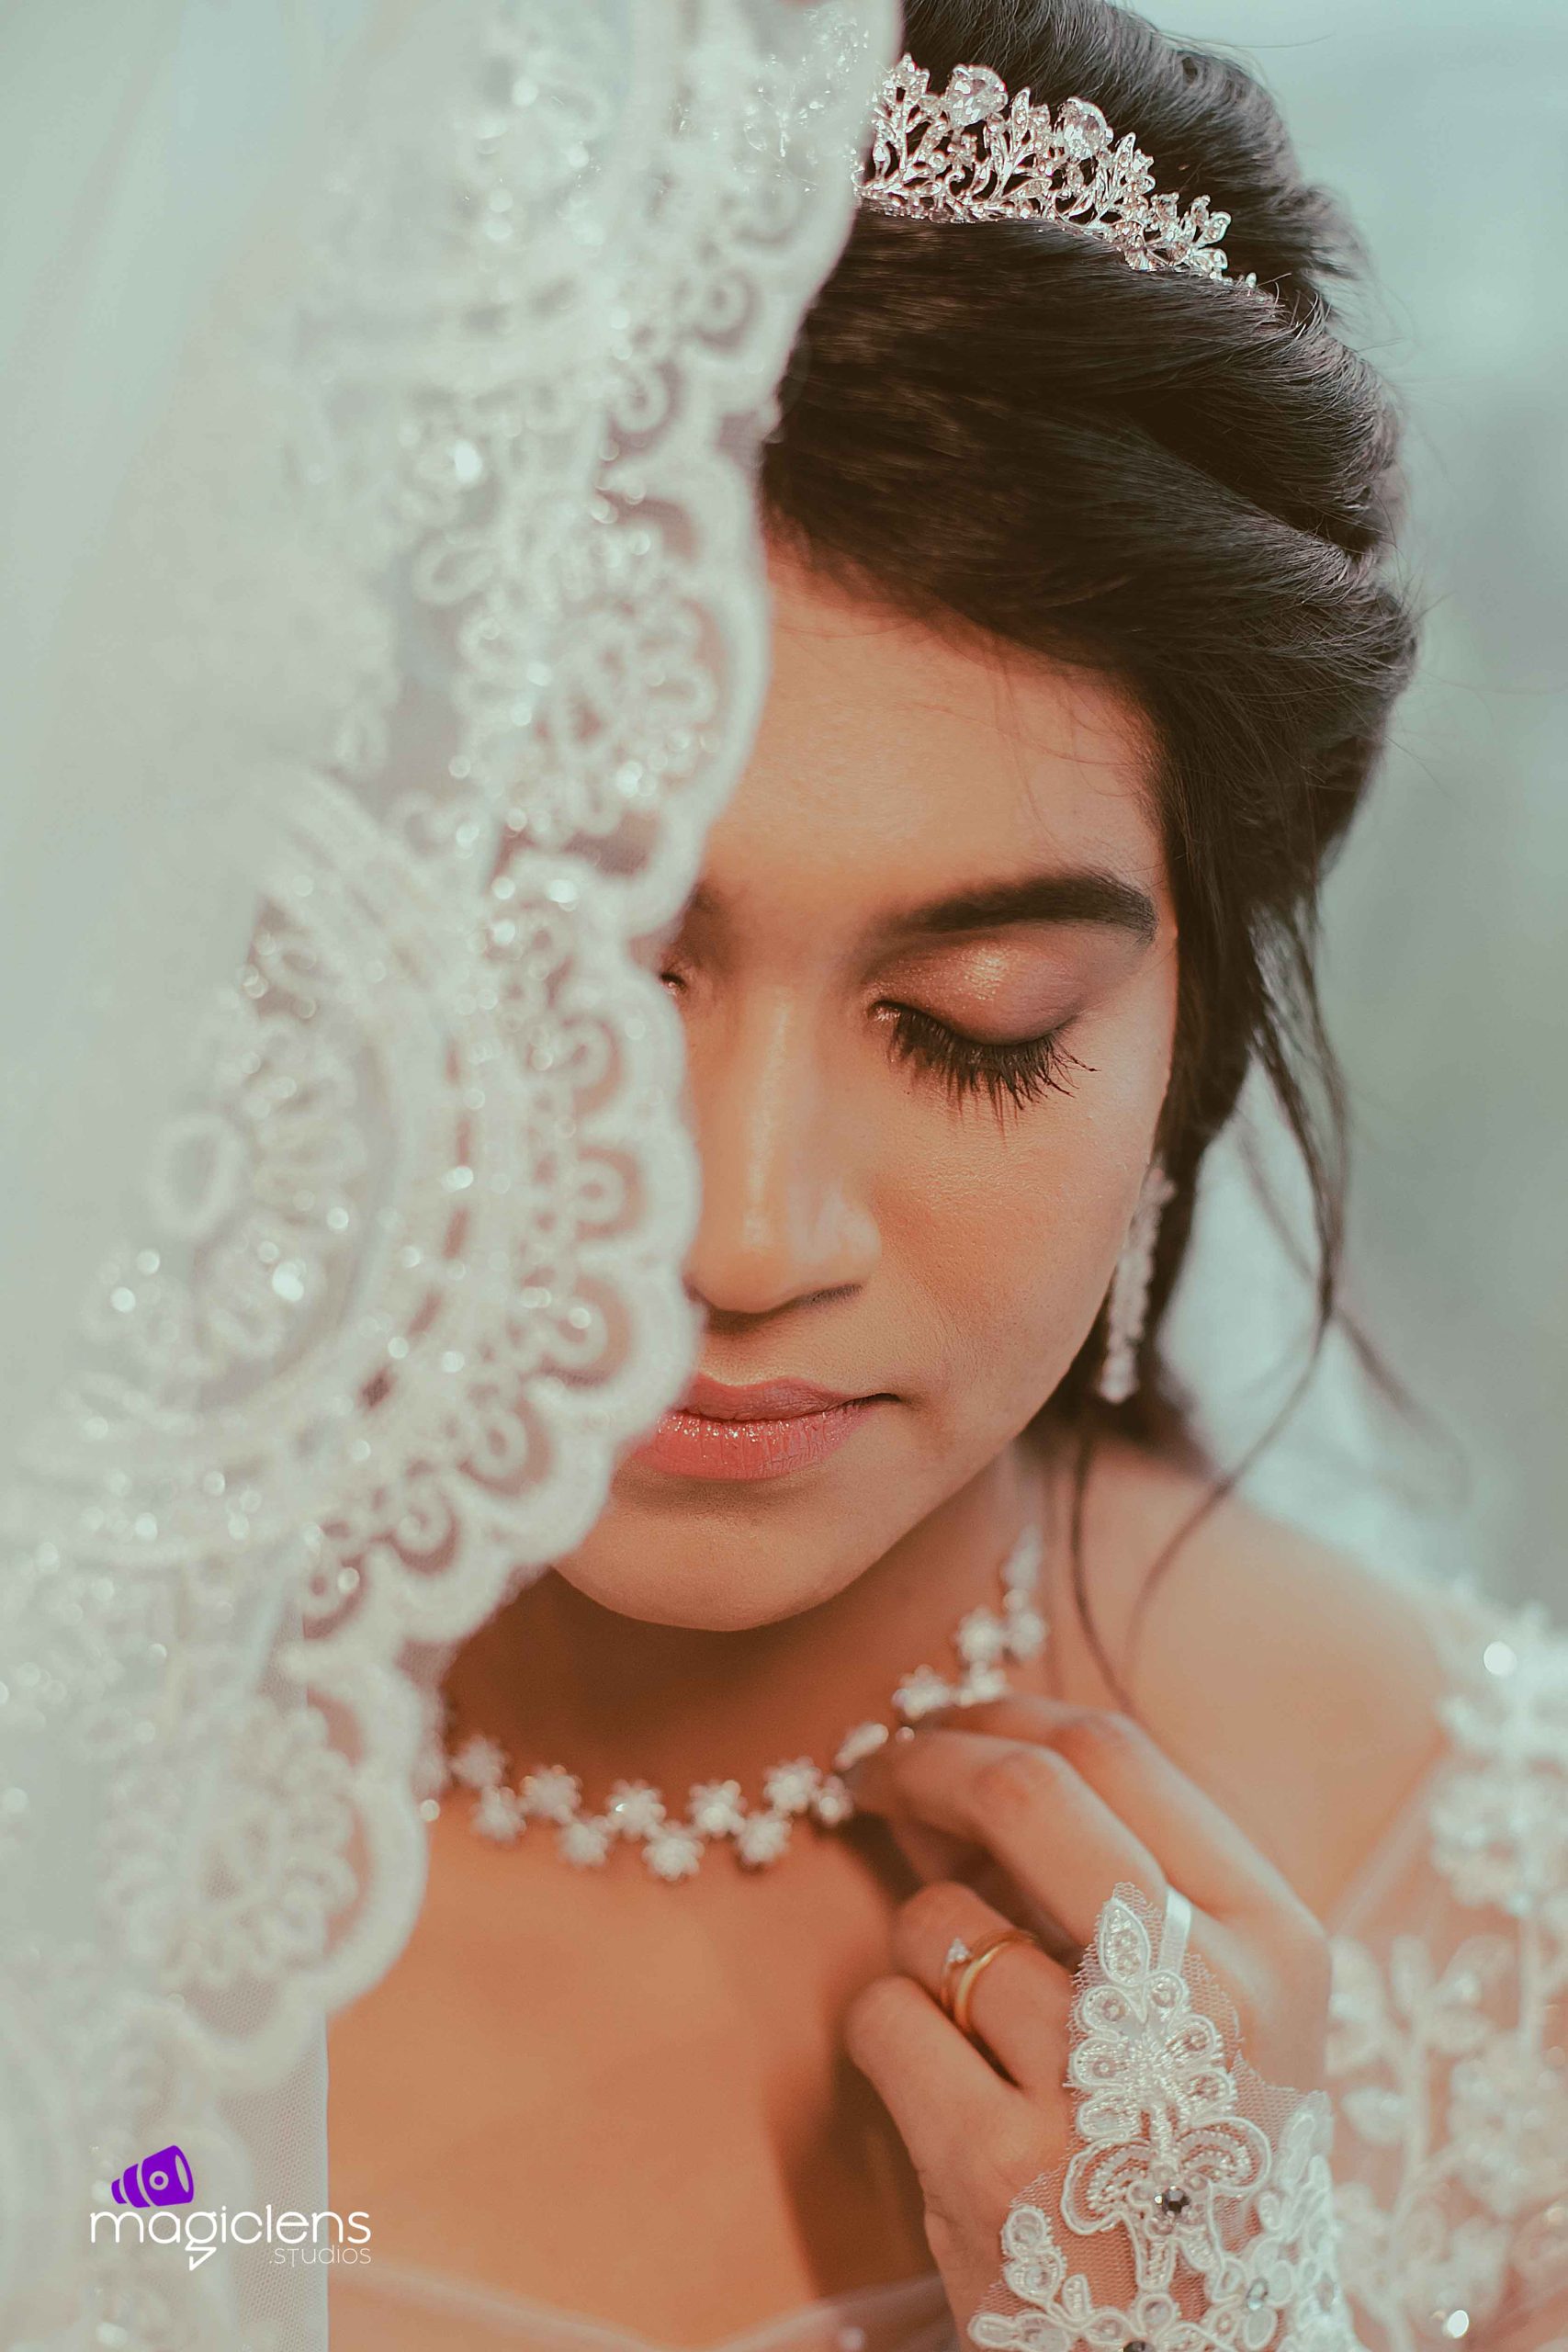 10 Glamorous Wedding Hairstyles You'll Love - Belle The Magazine